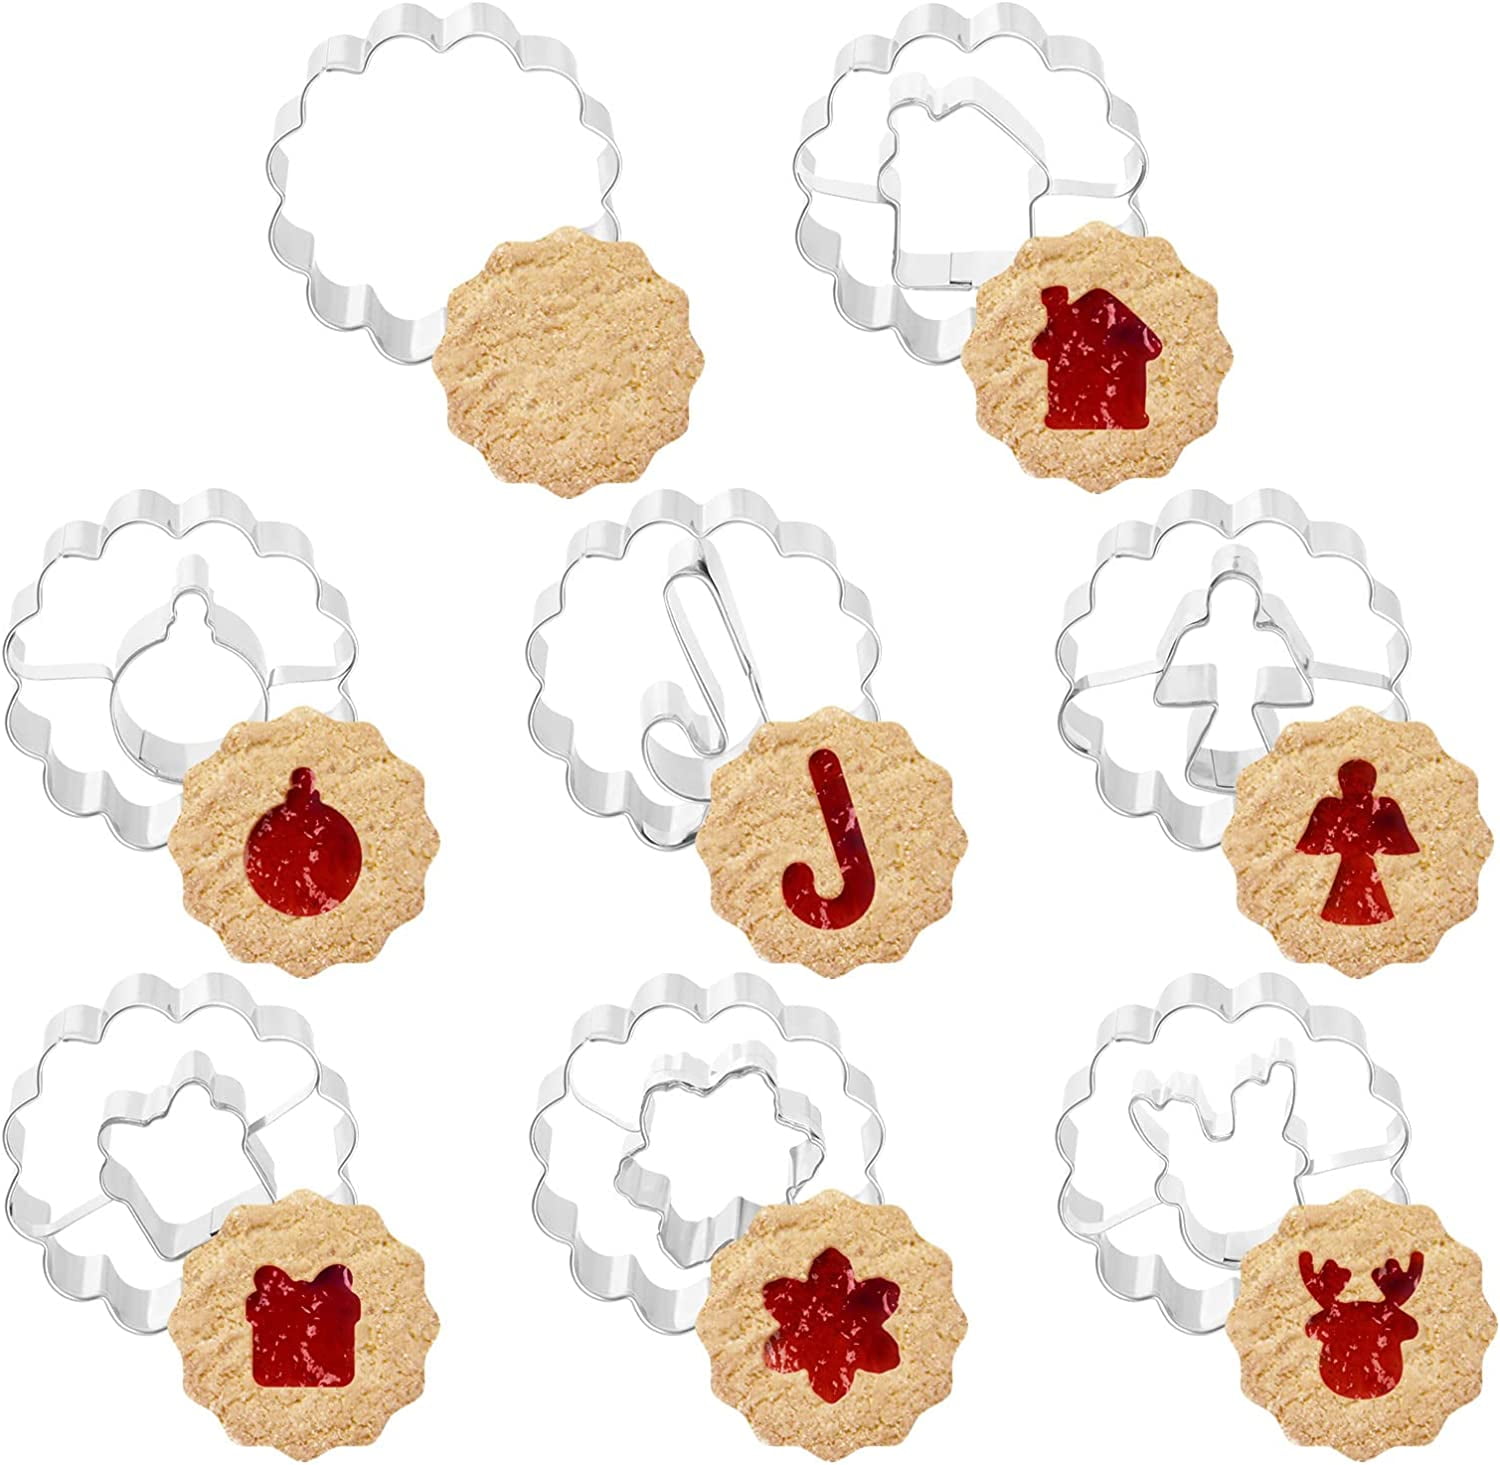  8 Piece Mini Christmas Cookie Cutters, One-touch